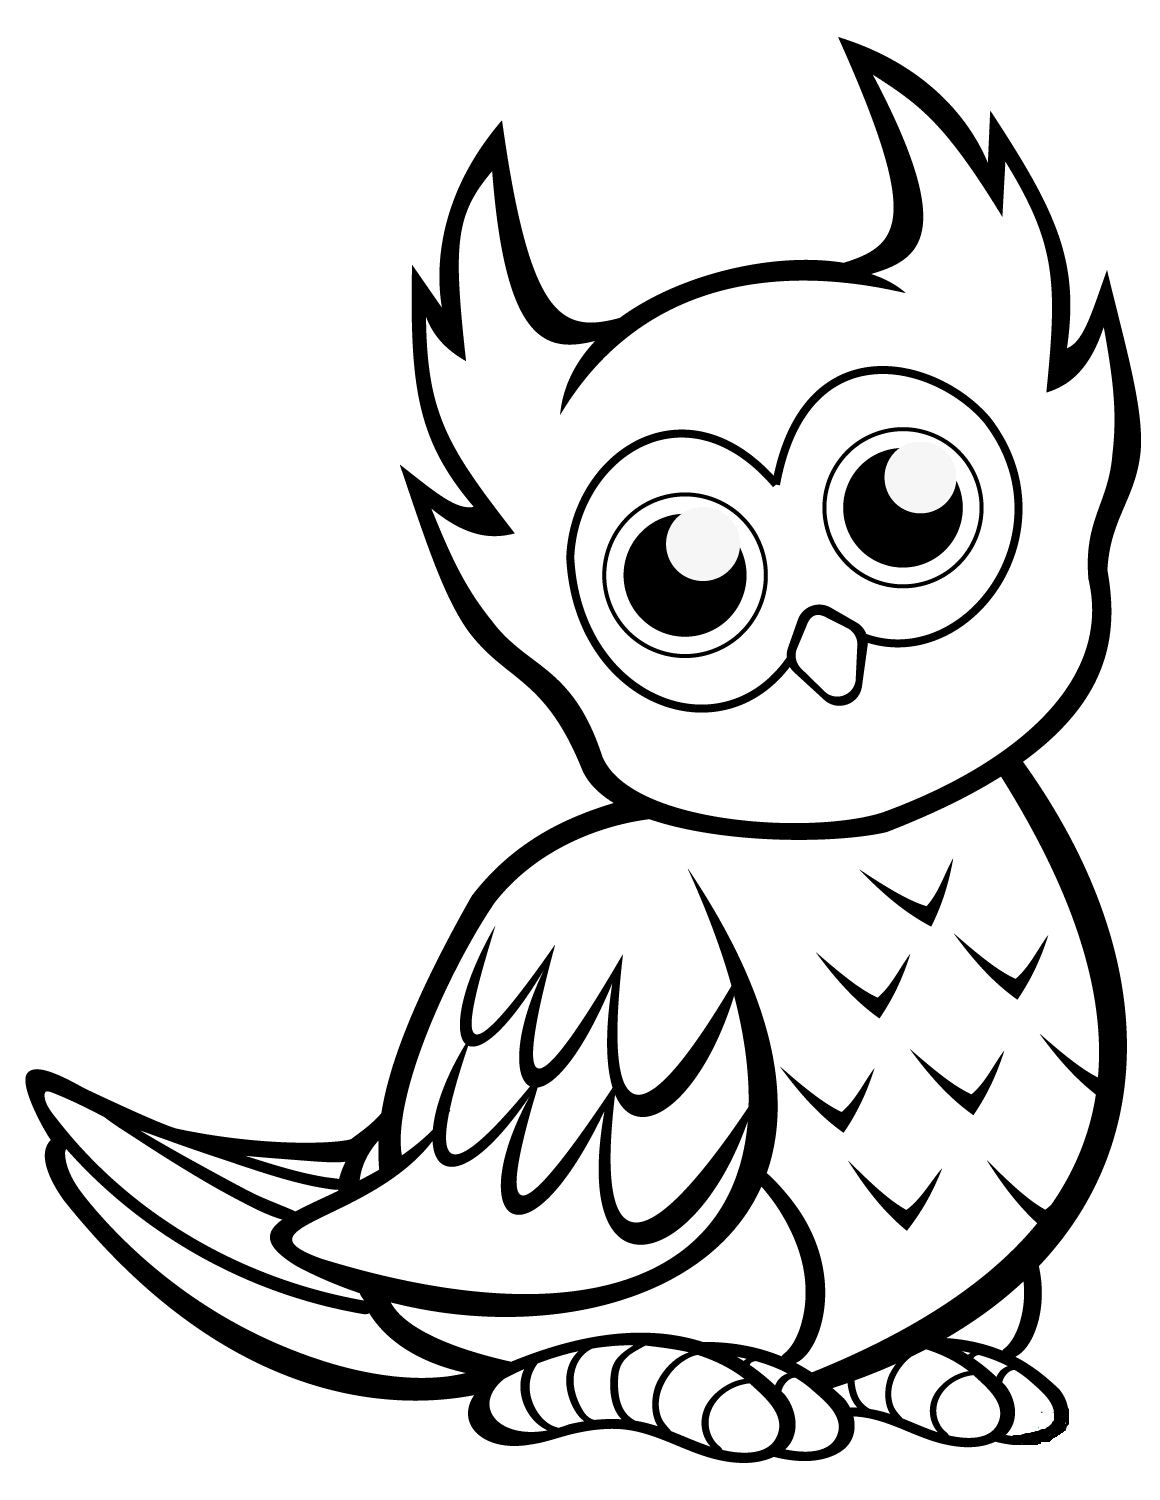 35-free-owl-coloring-pages-printable